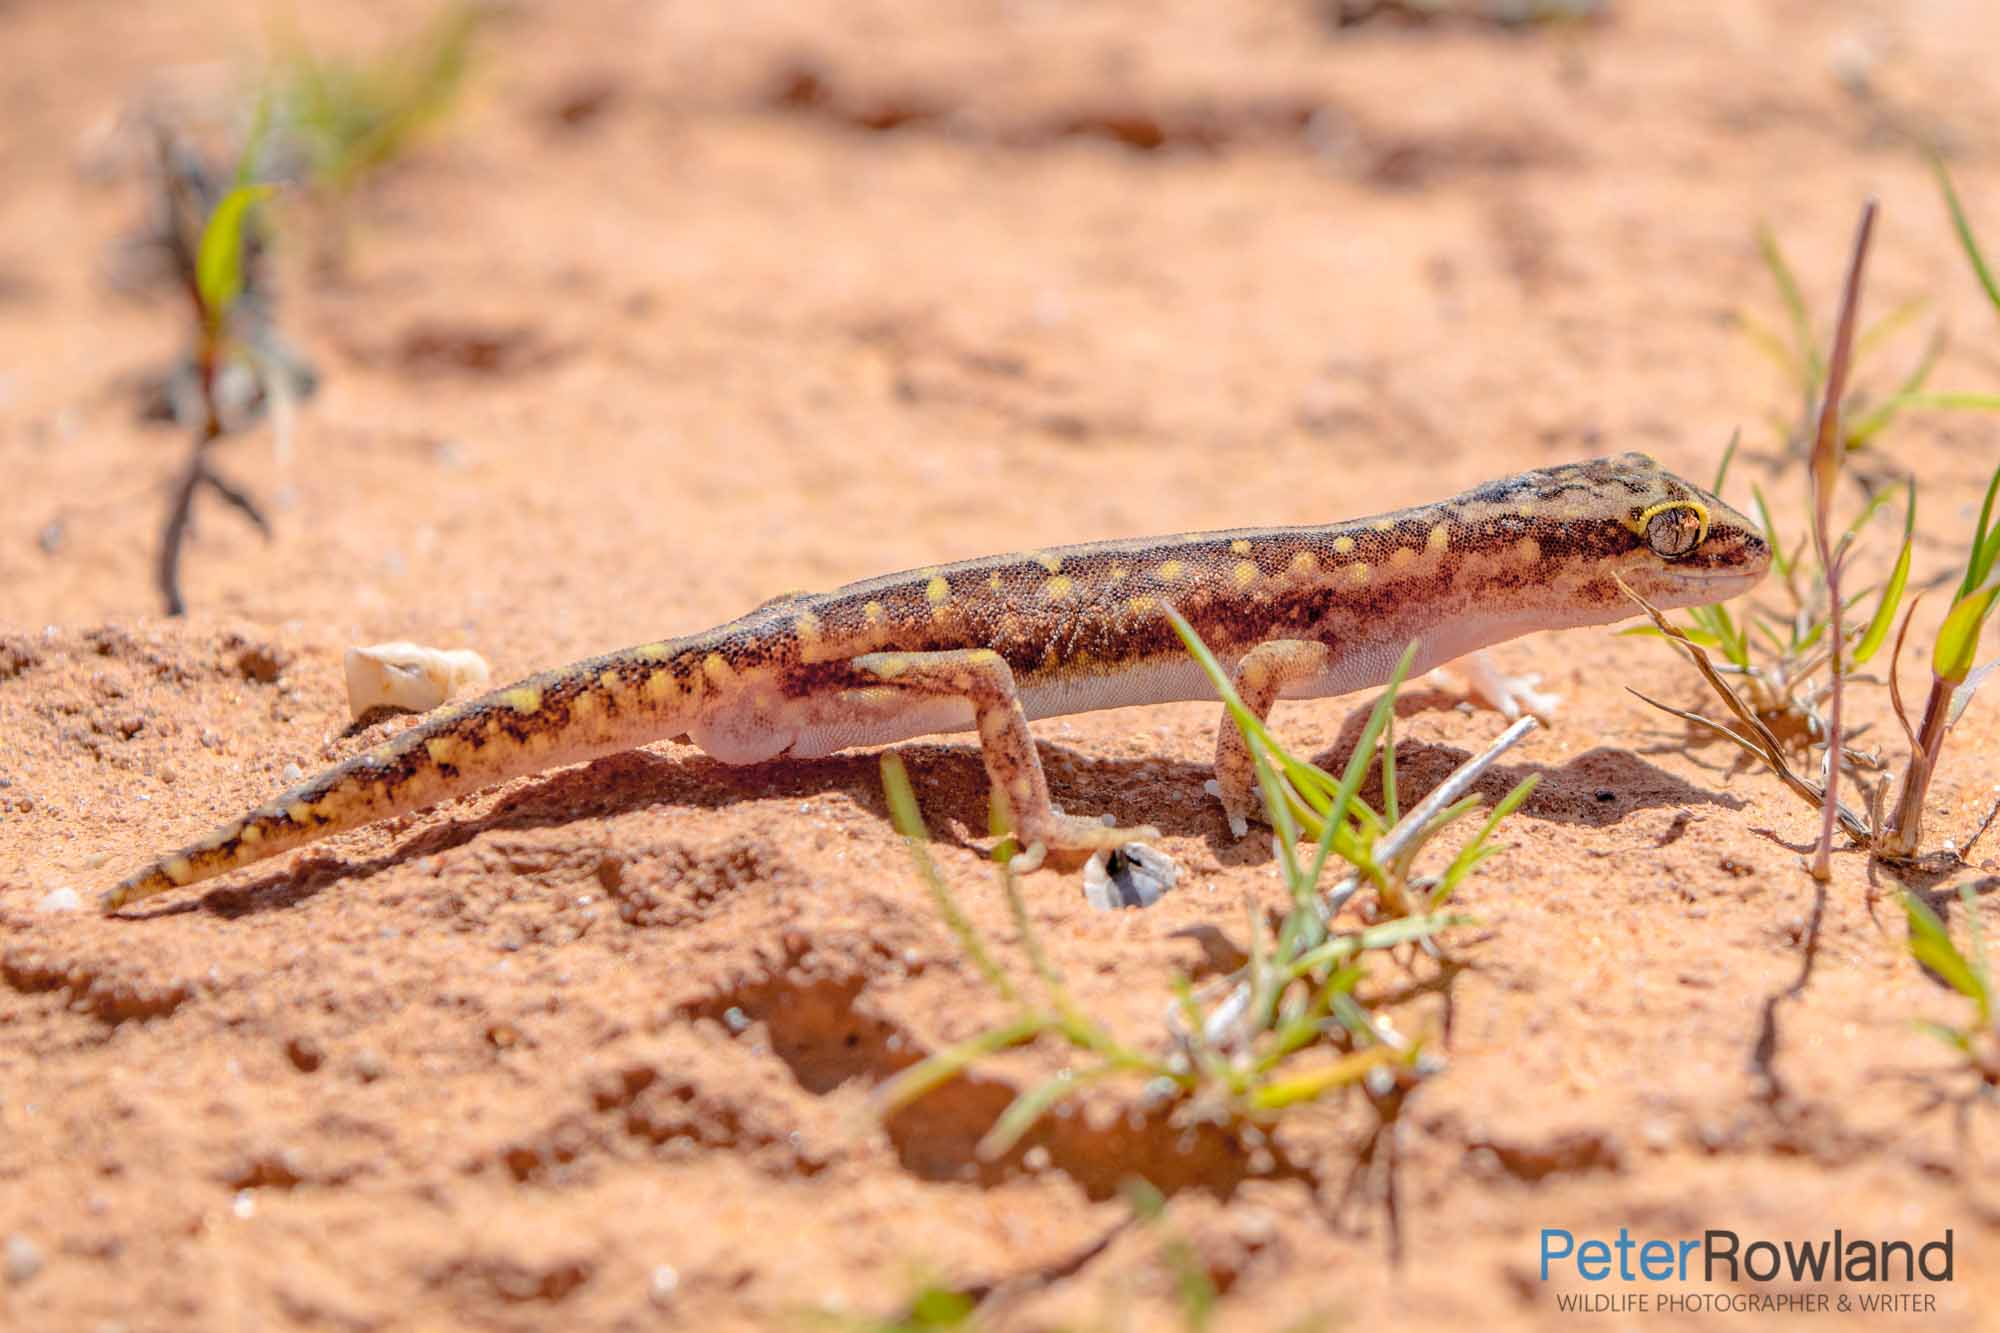 A Crowned Gecko on the sandy ground